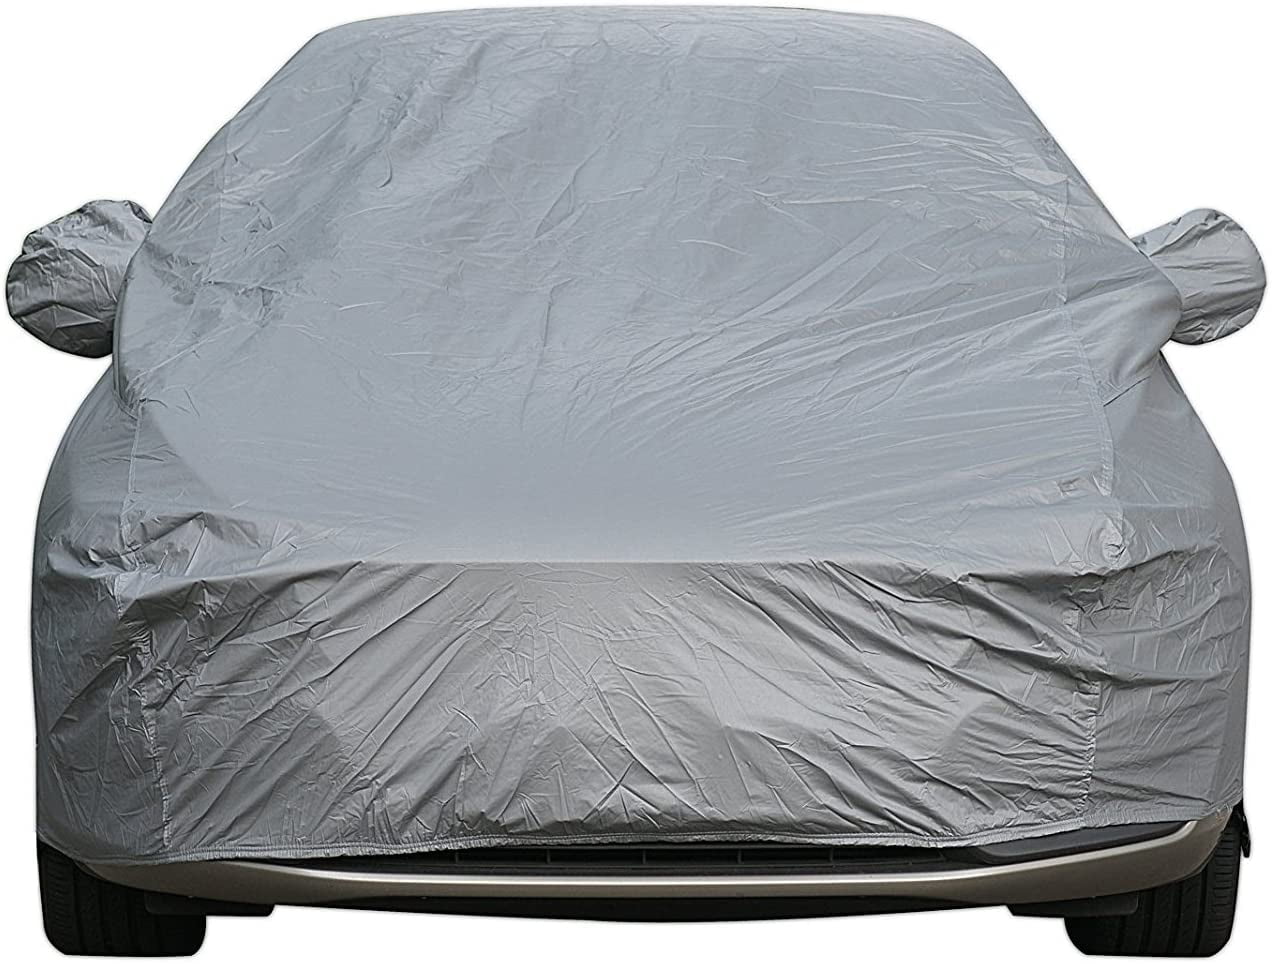 Universal Car Covers 400×160×120cm Outdoor Full Cover Sun UV Snow Dust Resistant